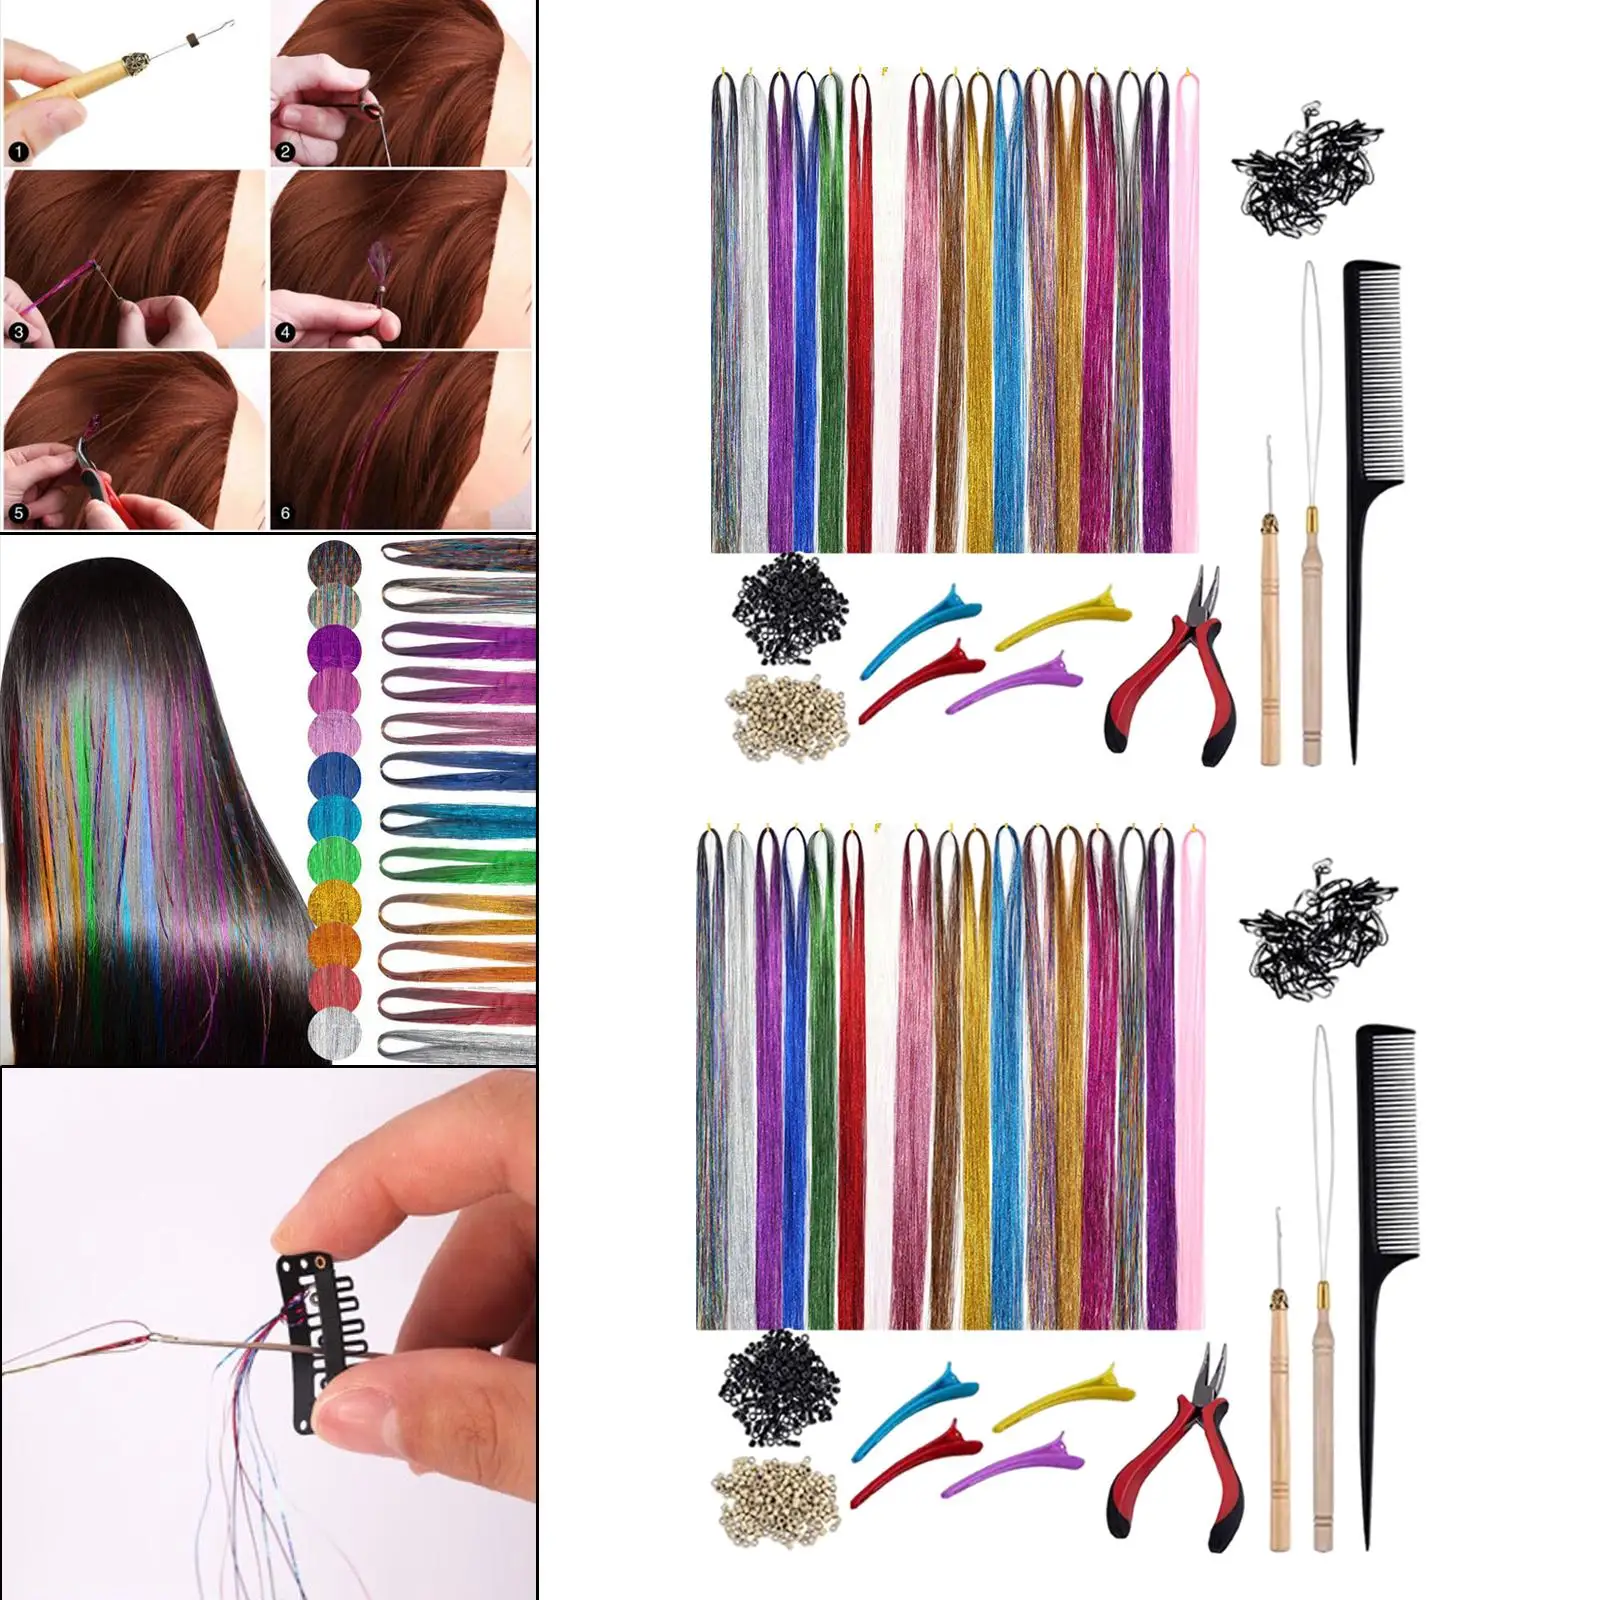 Hair Extension Tinsel Kit with Tools 200Pcs Rings Beads Multi-Color for Cosplay Hair Styling Salon Braiding Hair Women Girls